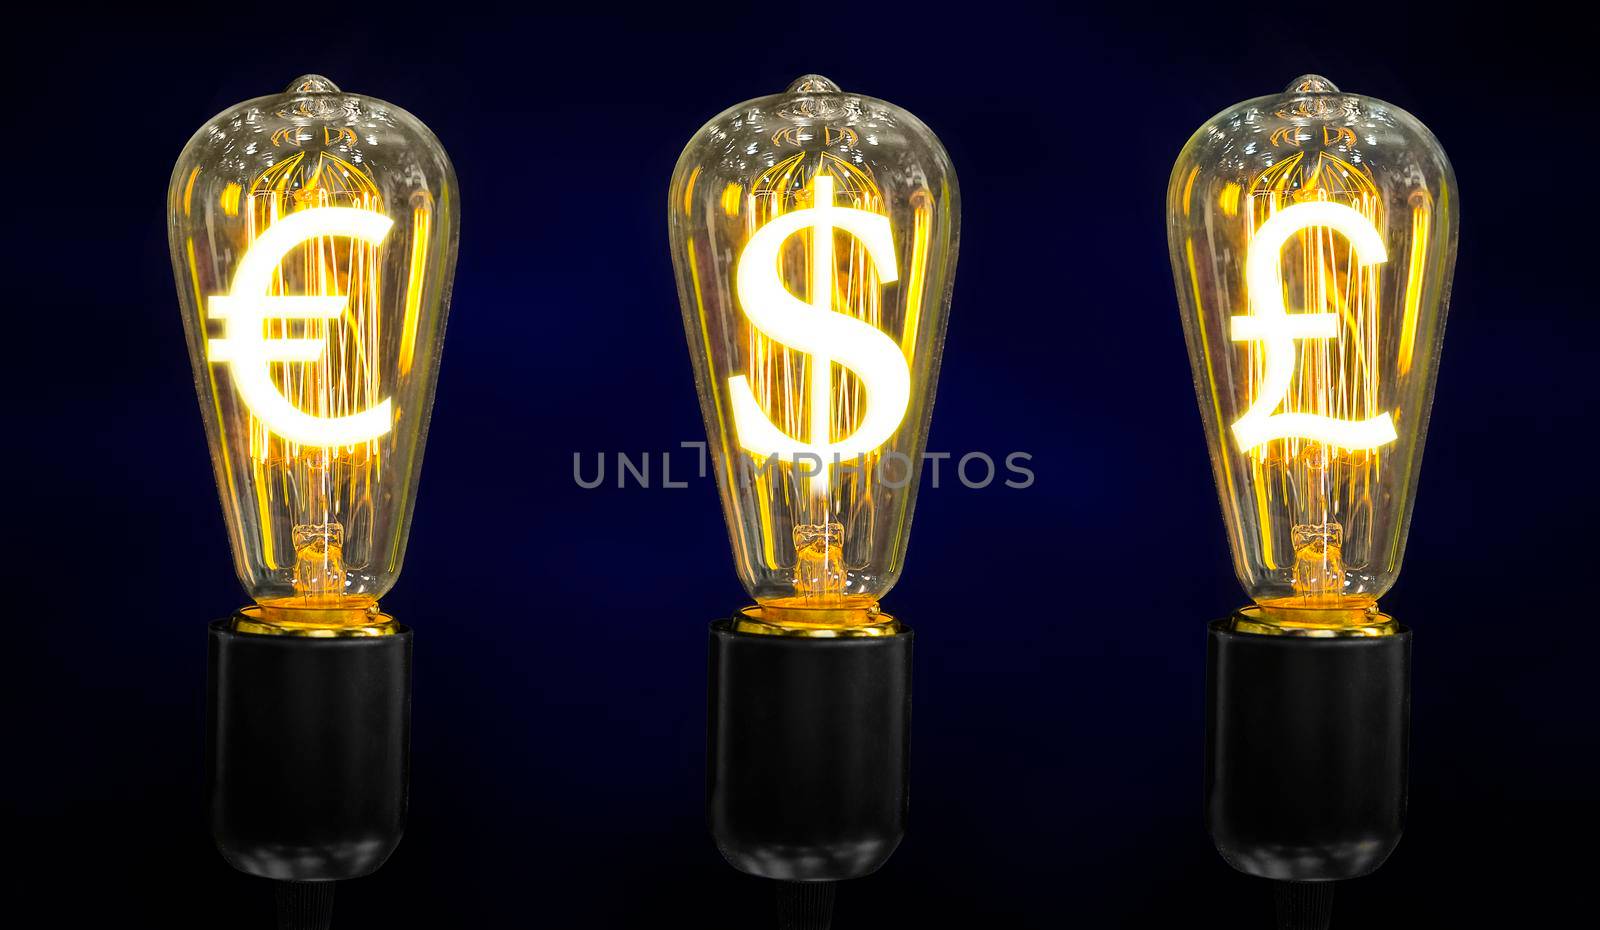 Lamps that glow symbols of world currencies